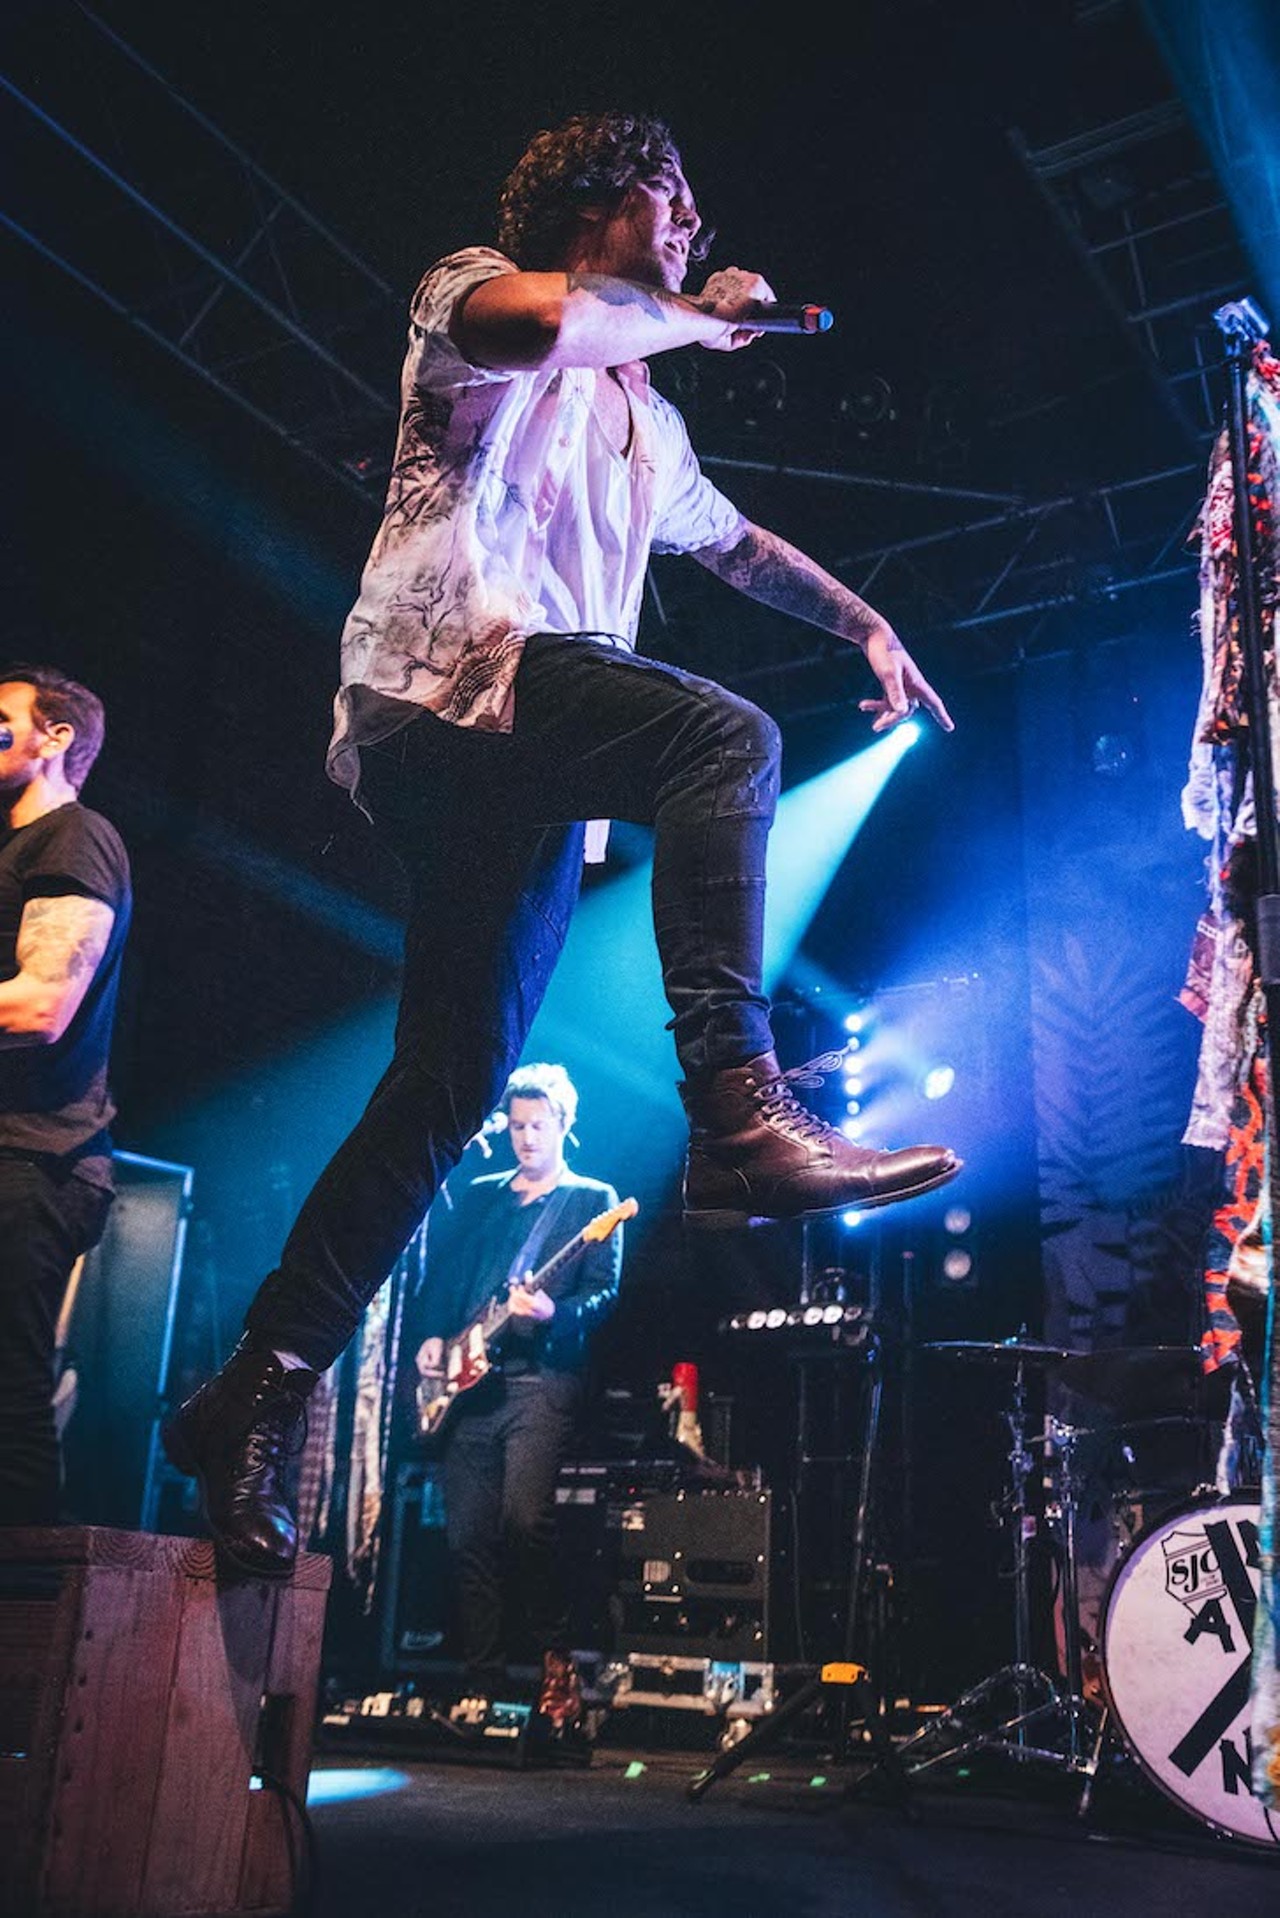 Photos from American Authors, Magic Giant and Public at the Beacham